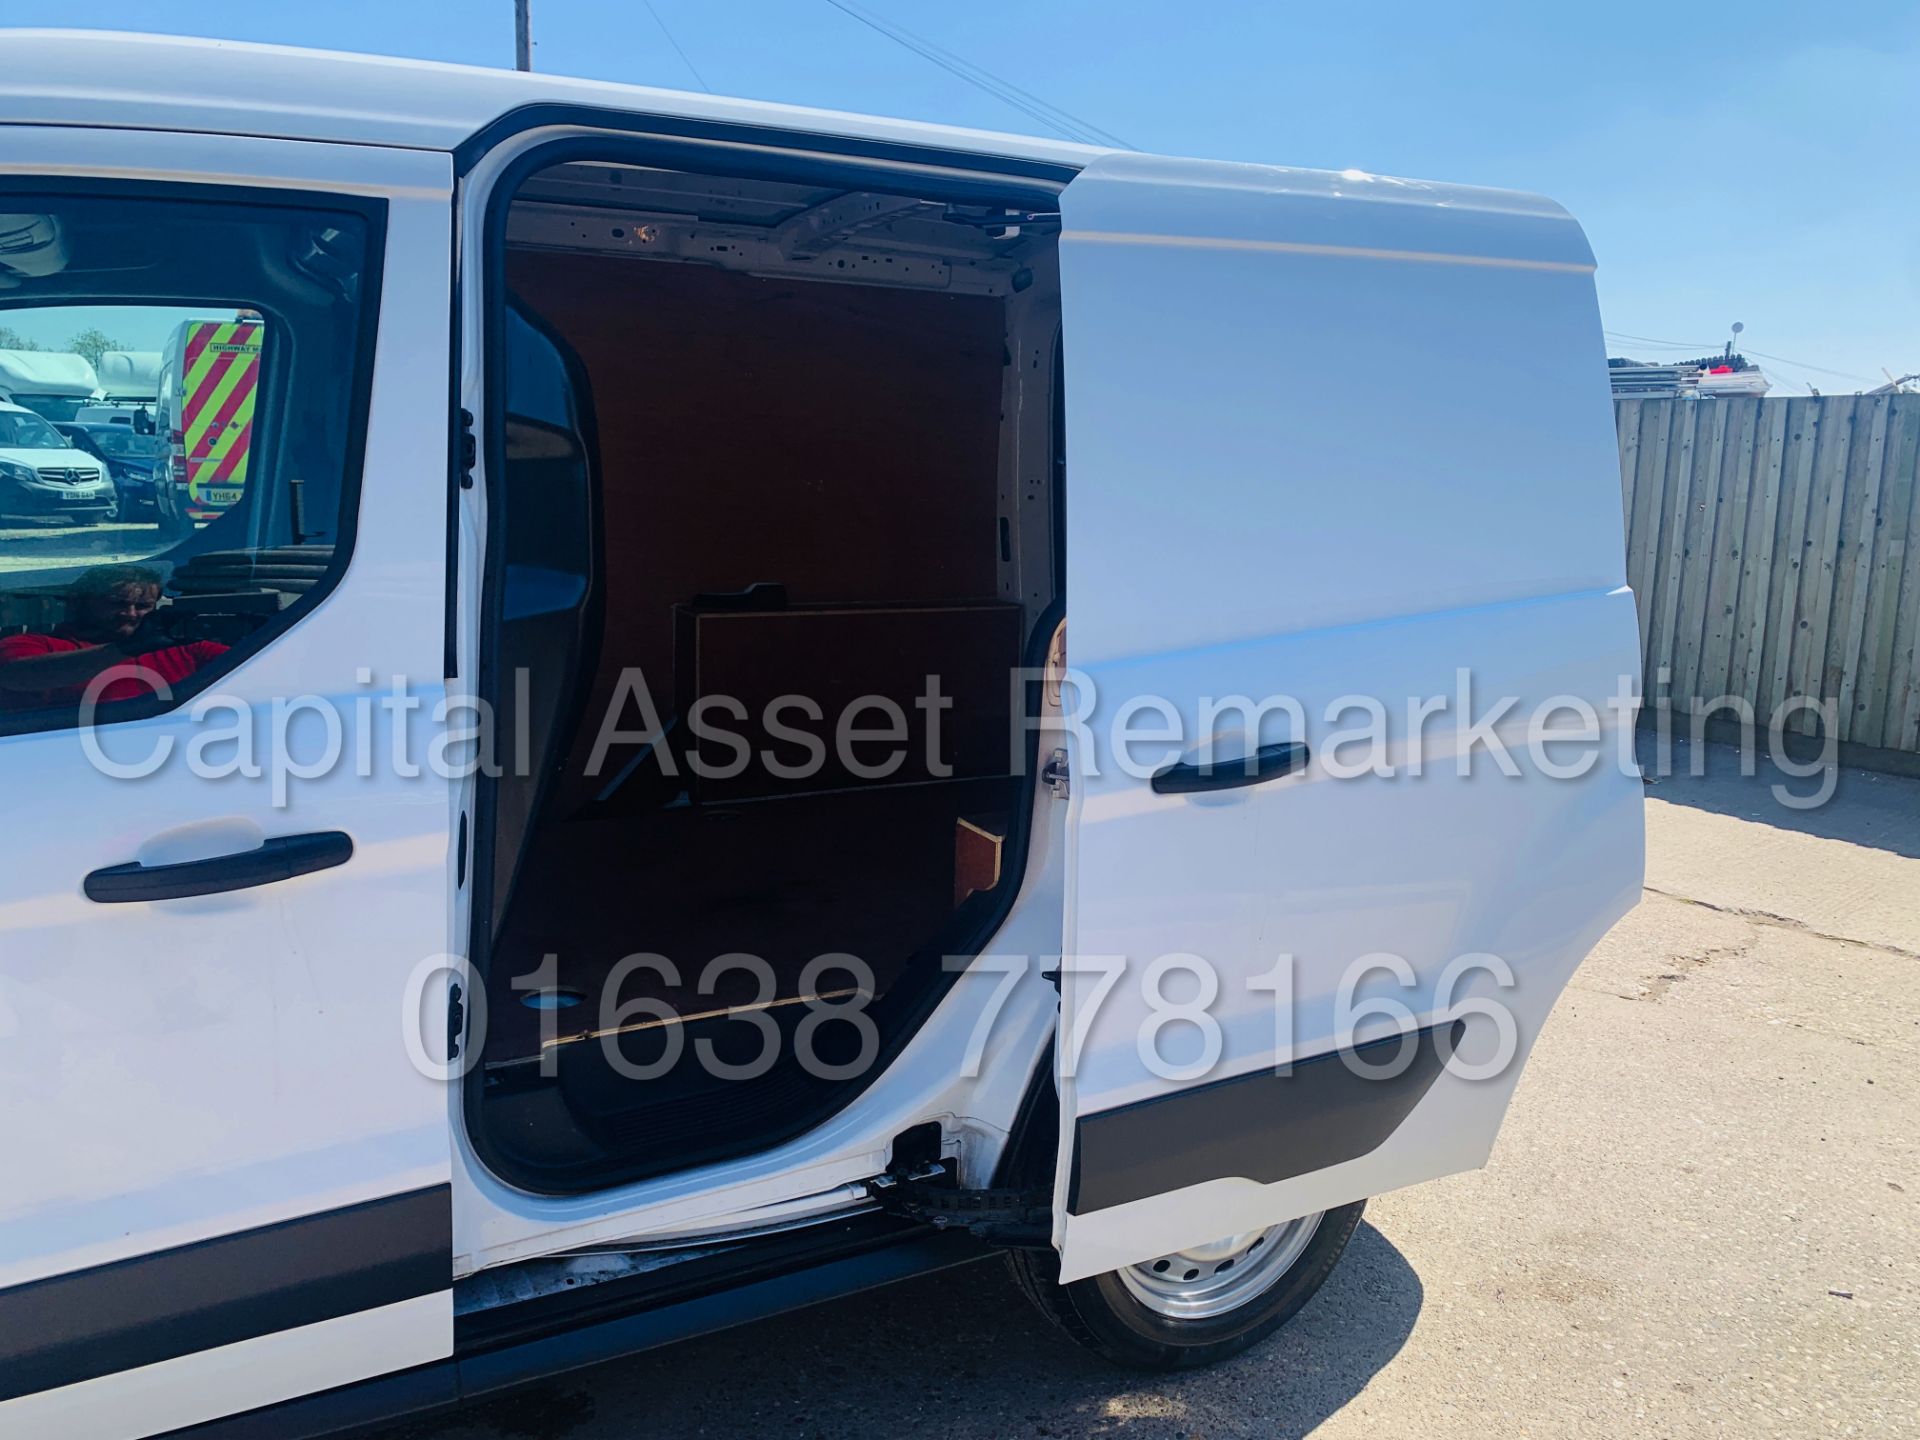 (On Sale) FORD TRANSIT CONNECT *SWB* (2017 - EURO 6) '1.5 TDCI - 6 SPEED' (1 OWNER - FULL HISTORY) - Image 23 of 38